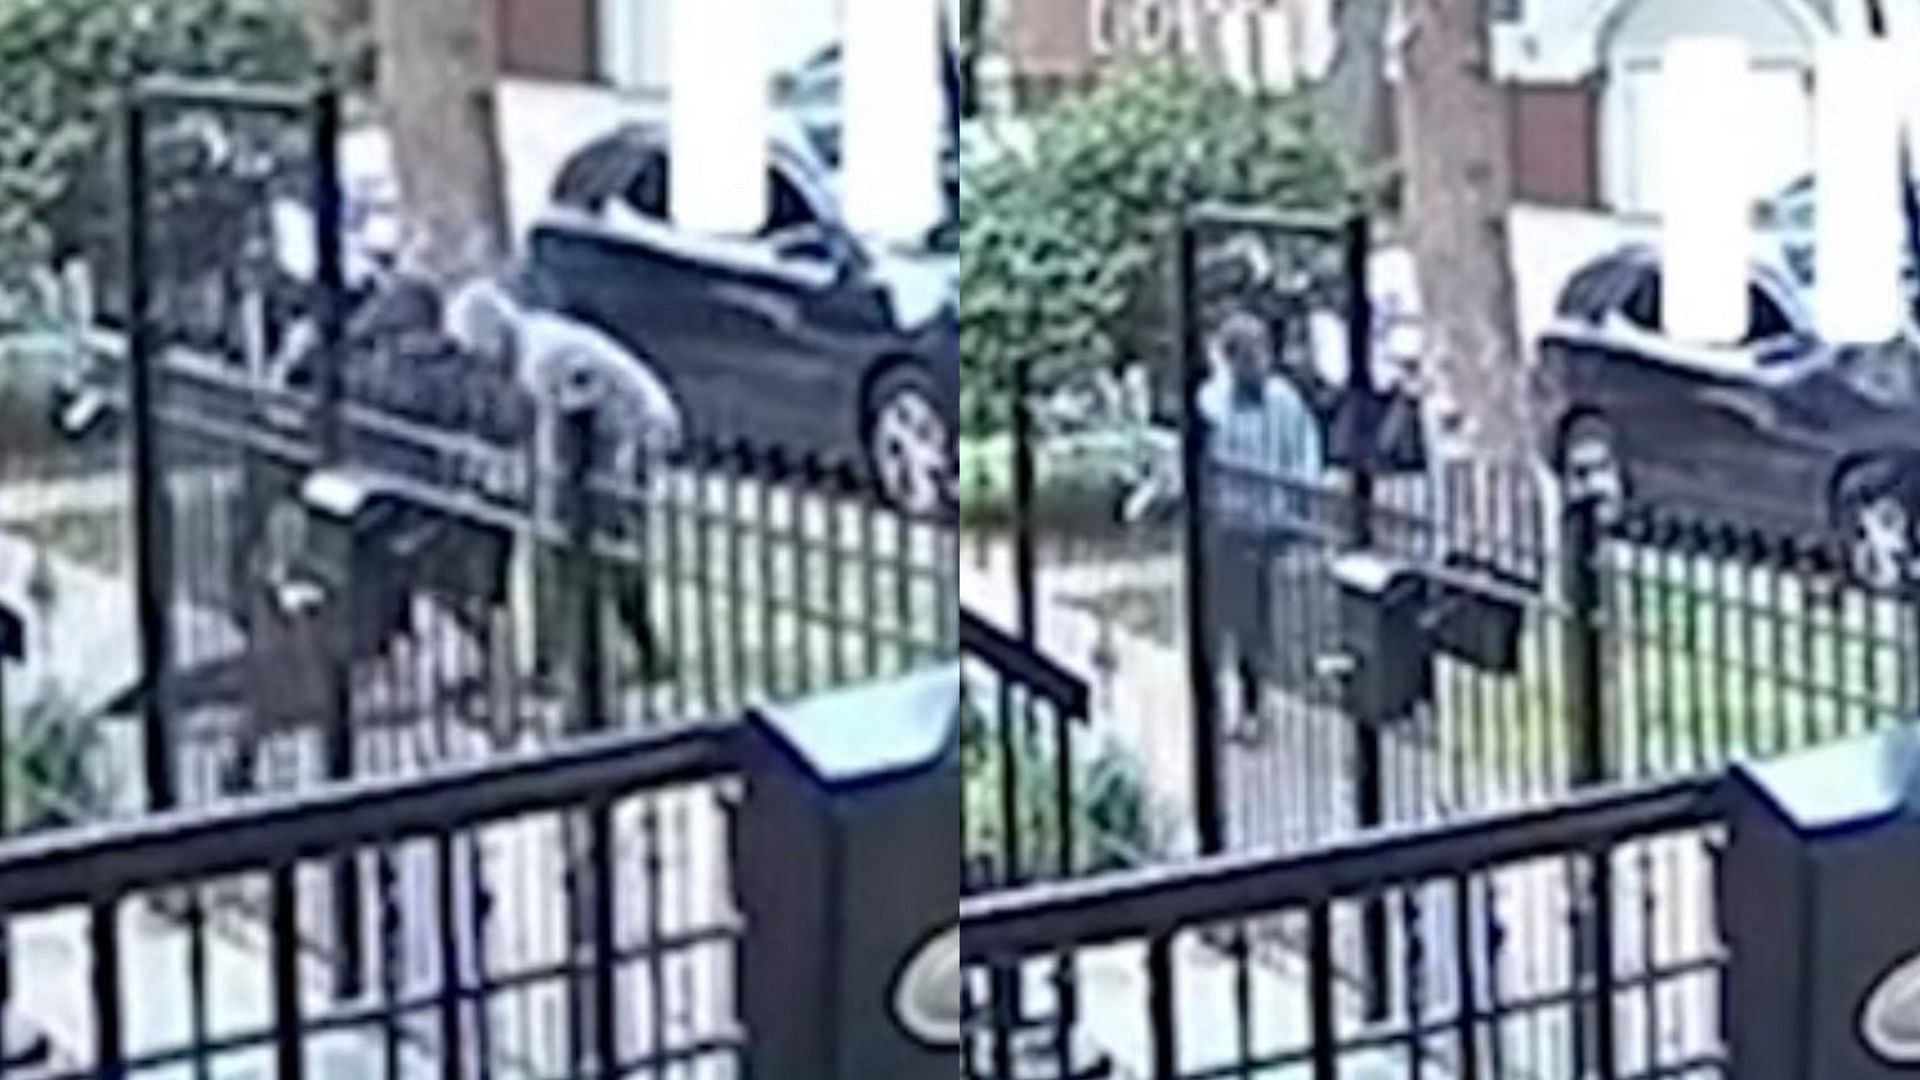 Another armed robbery in Chicago leaves quiet neighborhood frightened (Images via YouTube)